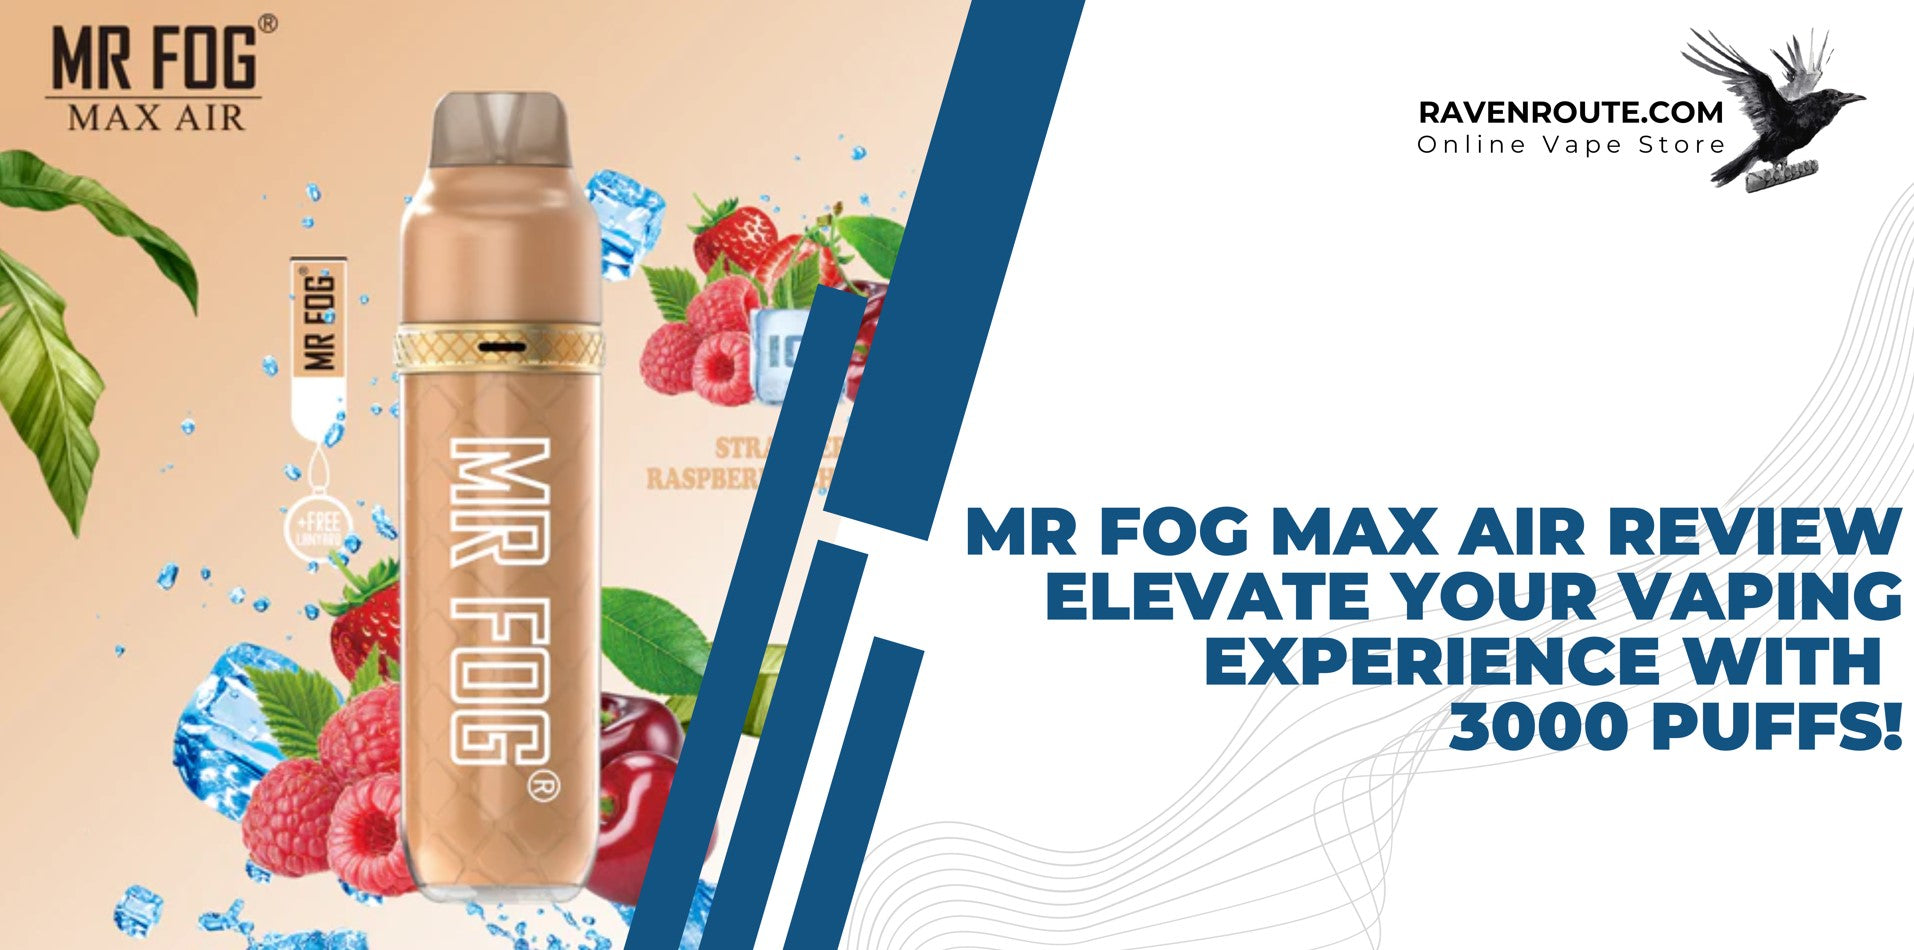 Mr Fog Max Air Review - Elevate Your Vaping Experience with 3000 Puffs!